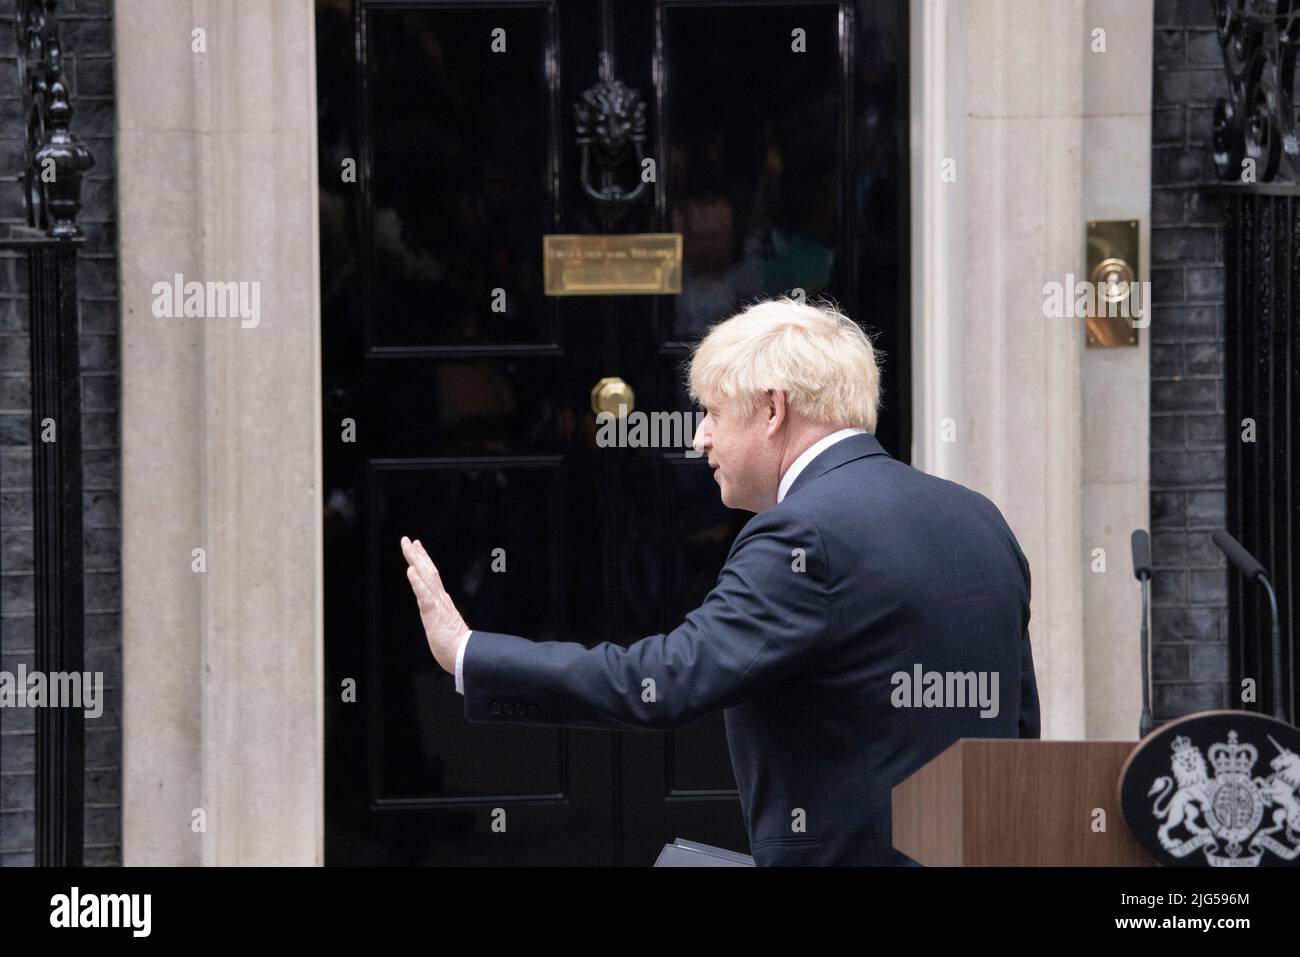 UK PRIME MINISTER BORIS JOHNSON ANNOUNCES HIS RESIGNATION IN DOWNING STREET TODAY. 07th July 2022 Downing Street, London, UK Credit: Jeff Gilbert/Alamy Live News Stock Photo